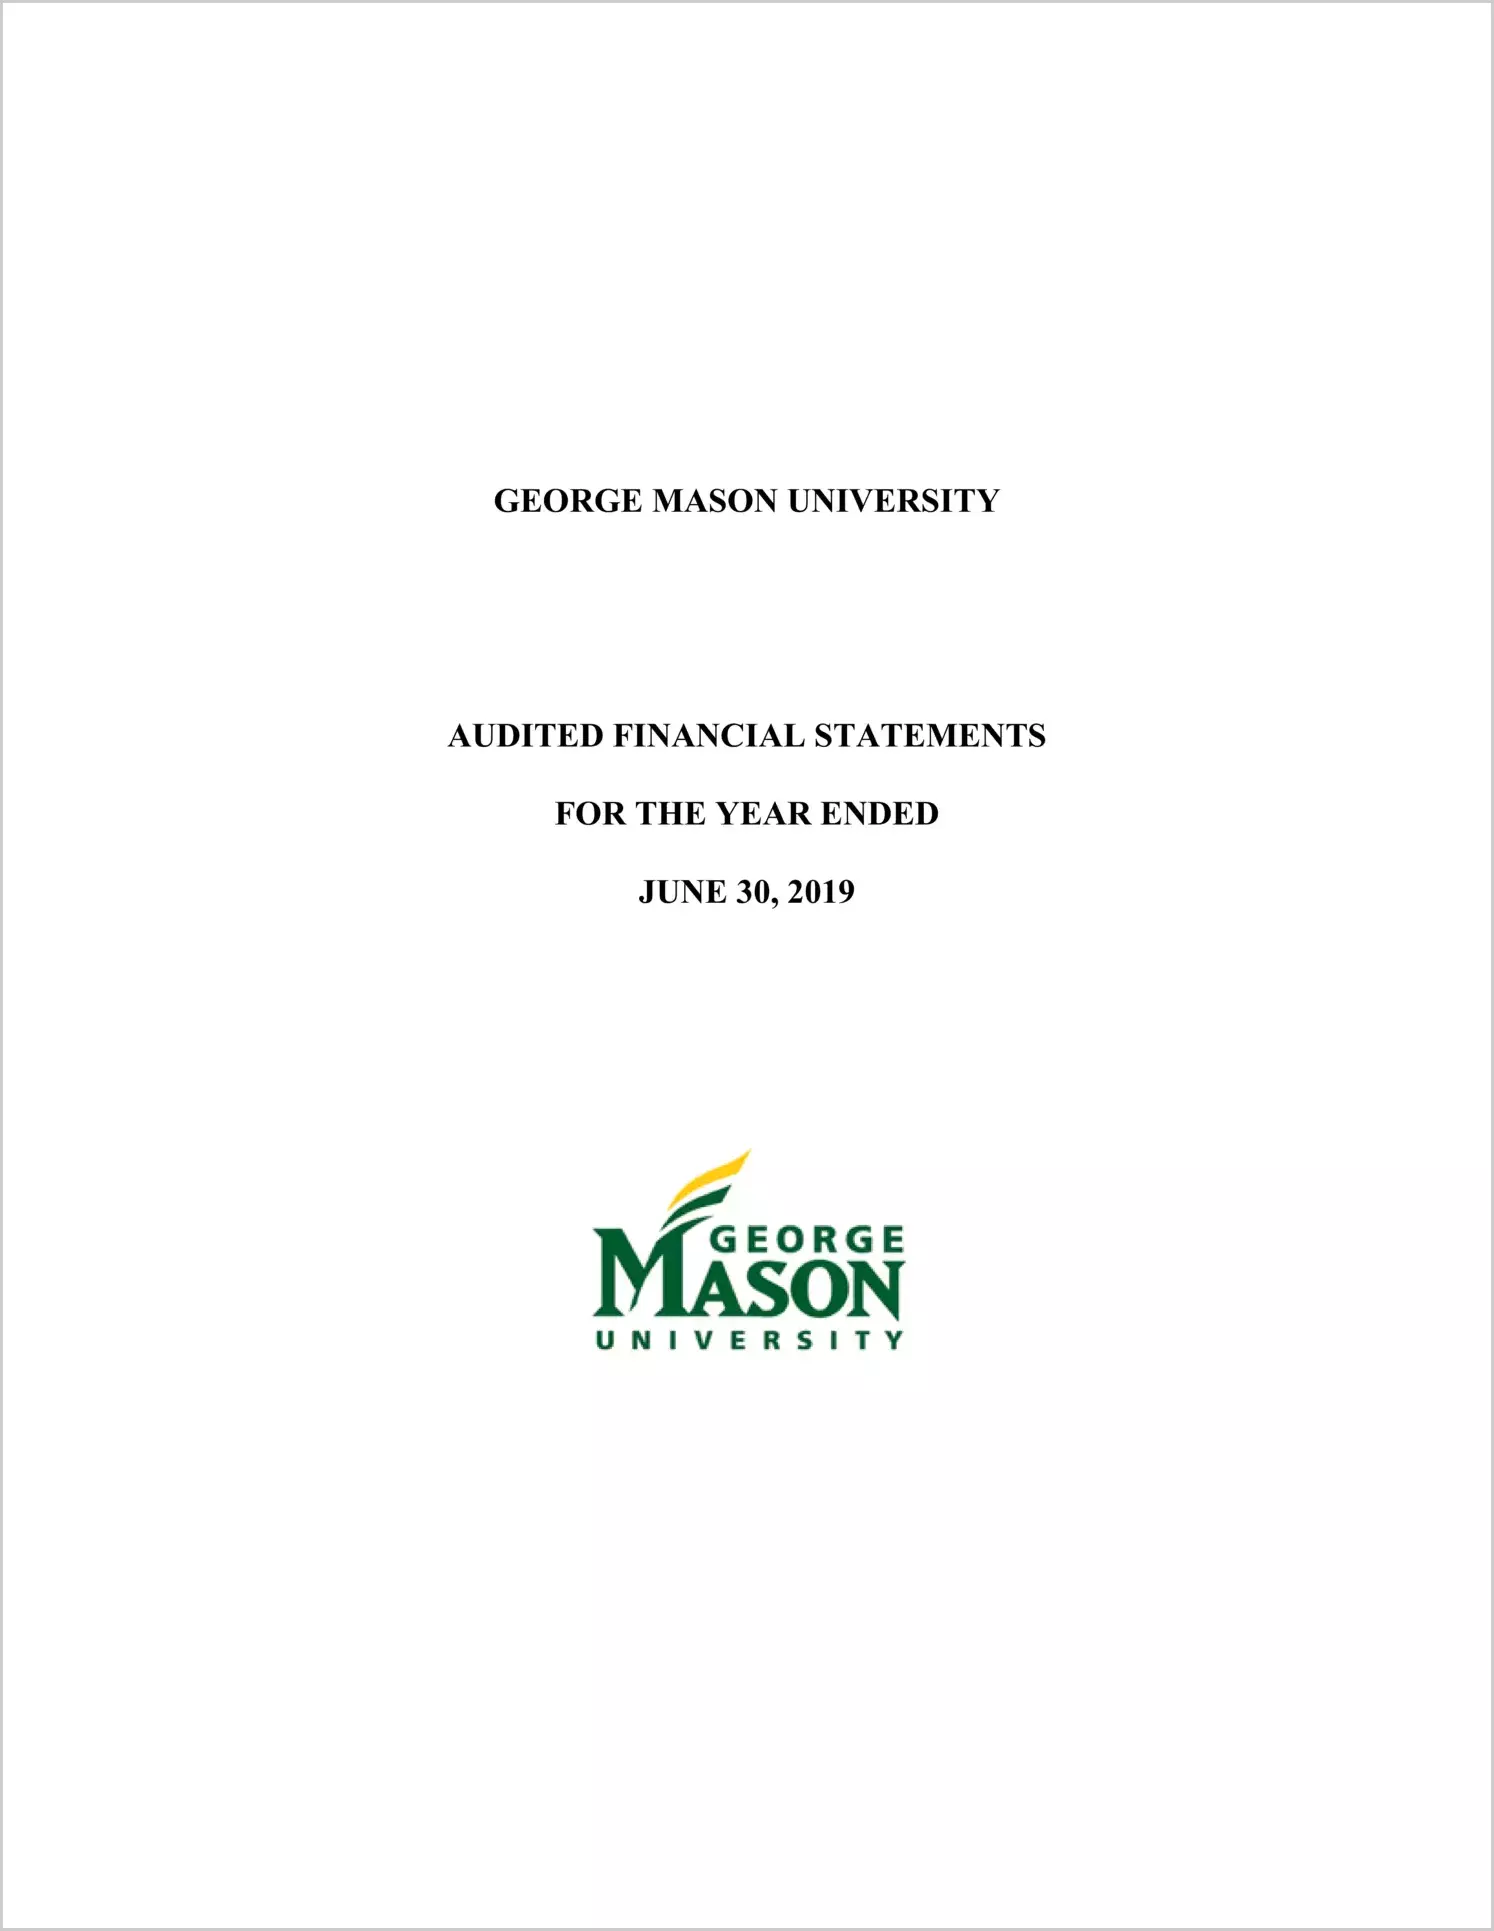 George Mason University Financial Statements for the year ended June 30, 2019